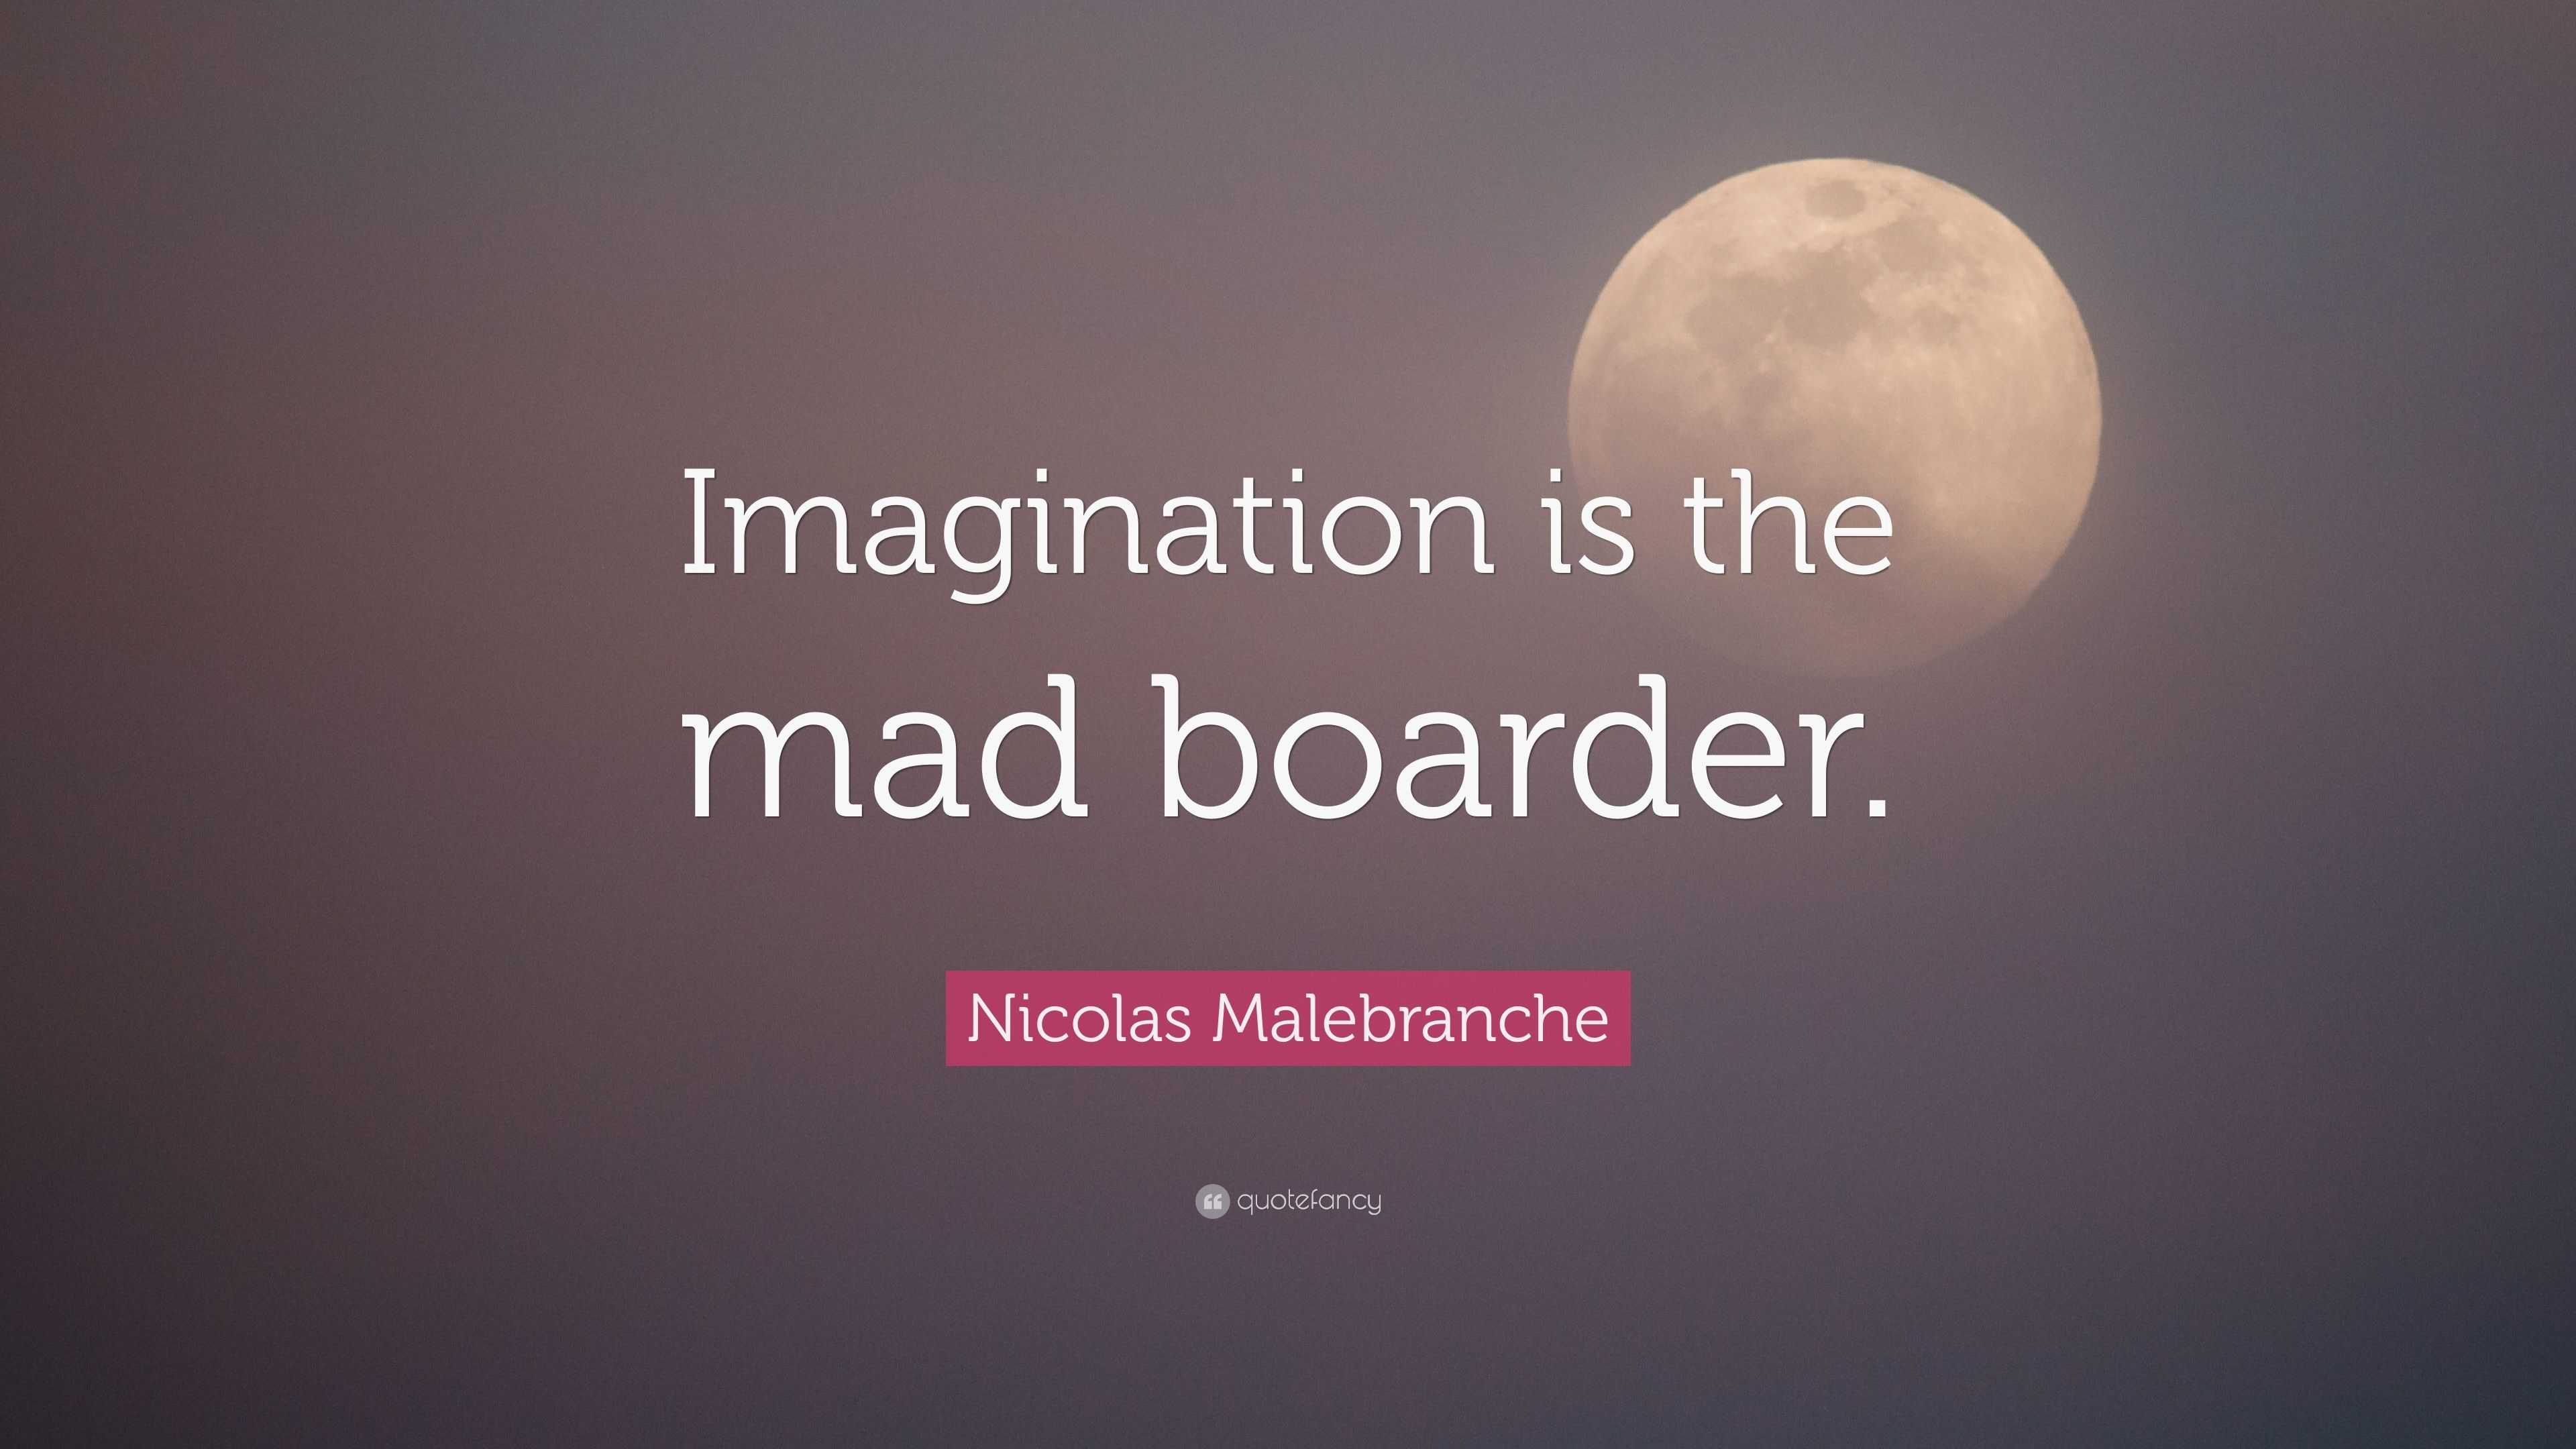 Nicolas Malebranche Quote: “Imagination is the mad boarder.” (7 wallpapers)  - Quotefancy